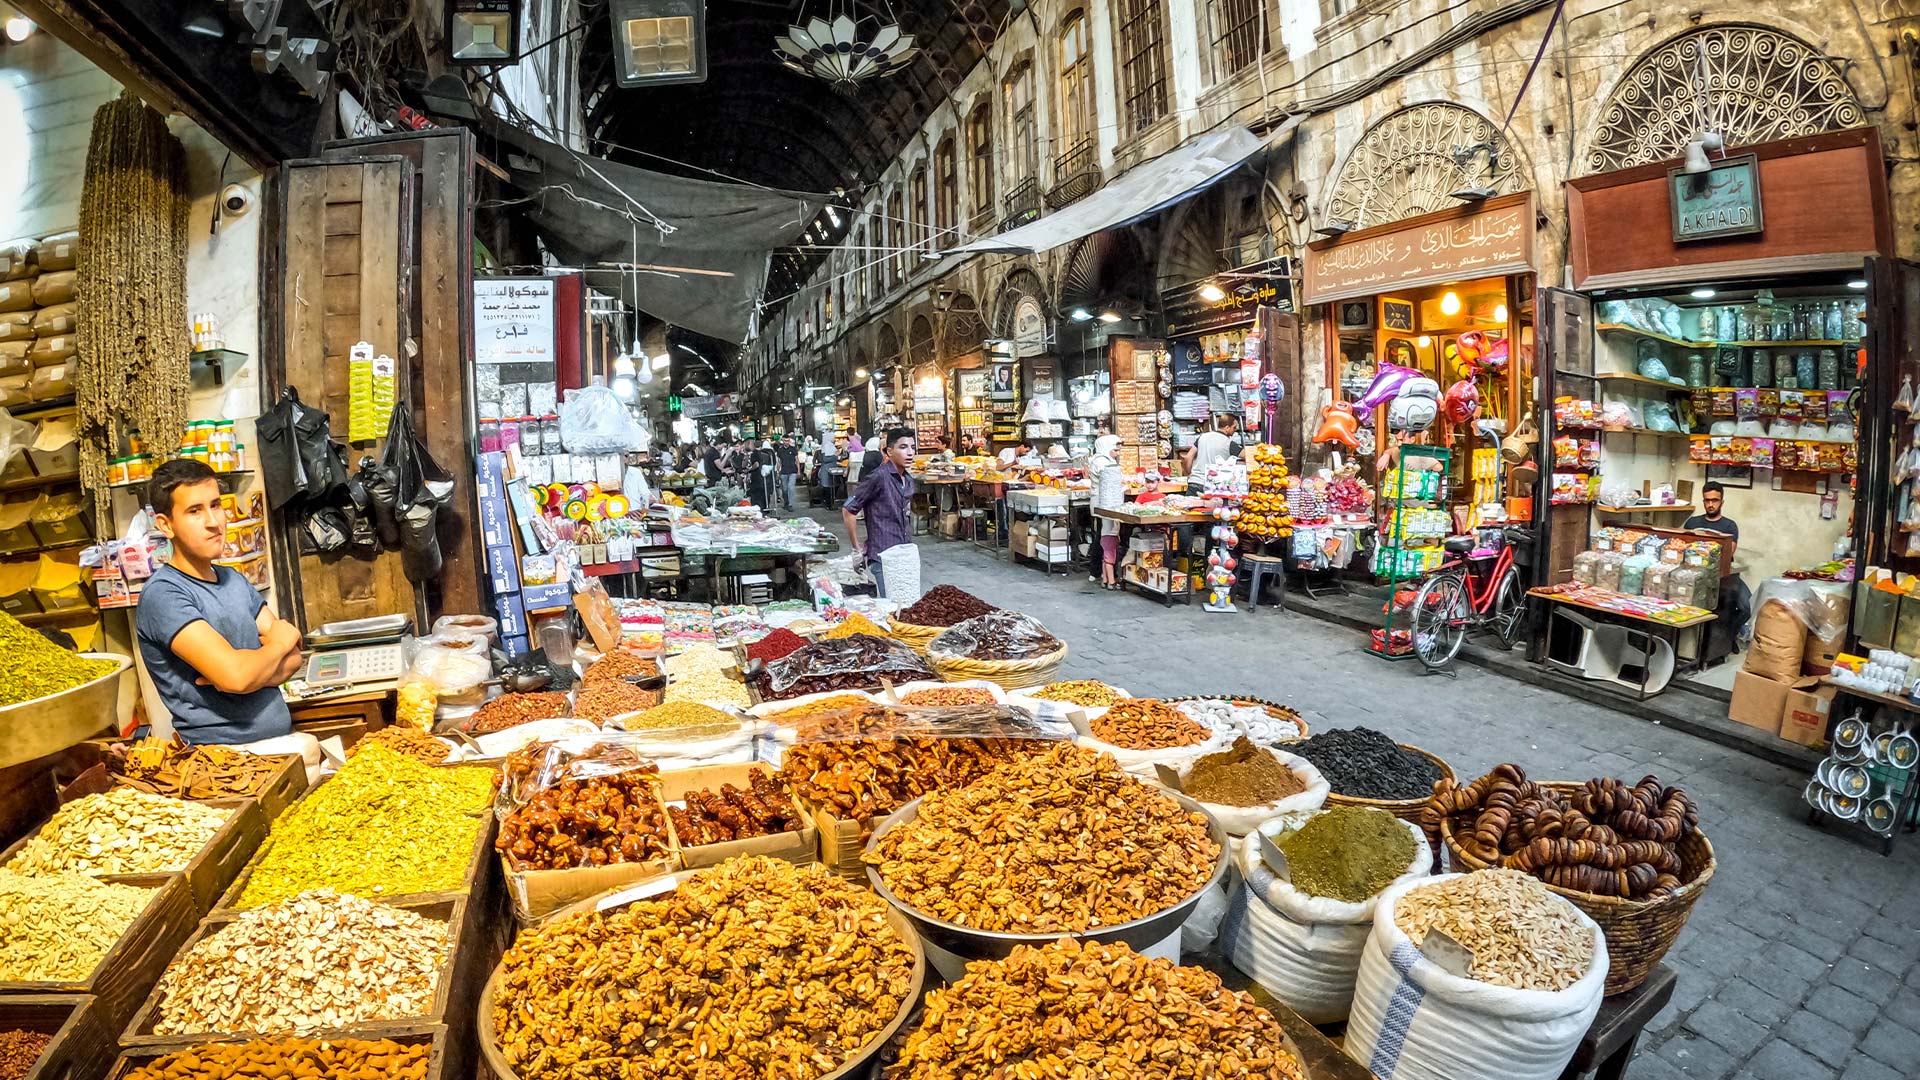 Spices Shop in Souq al-Hamidiyeh with the seller standing in the background welcoming shoppers.